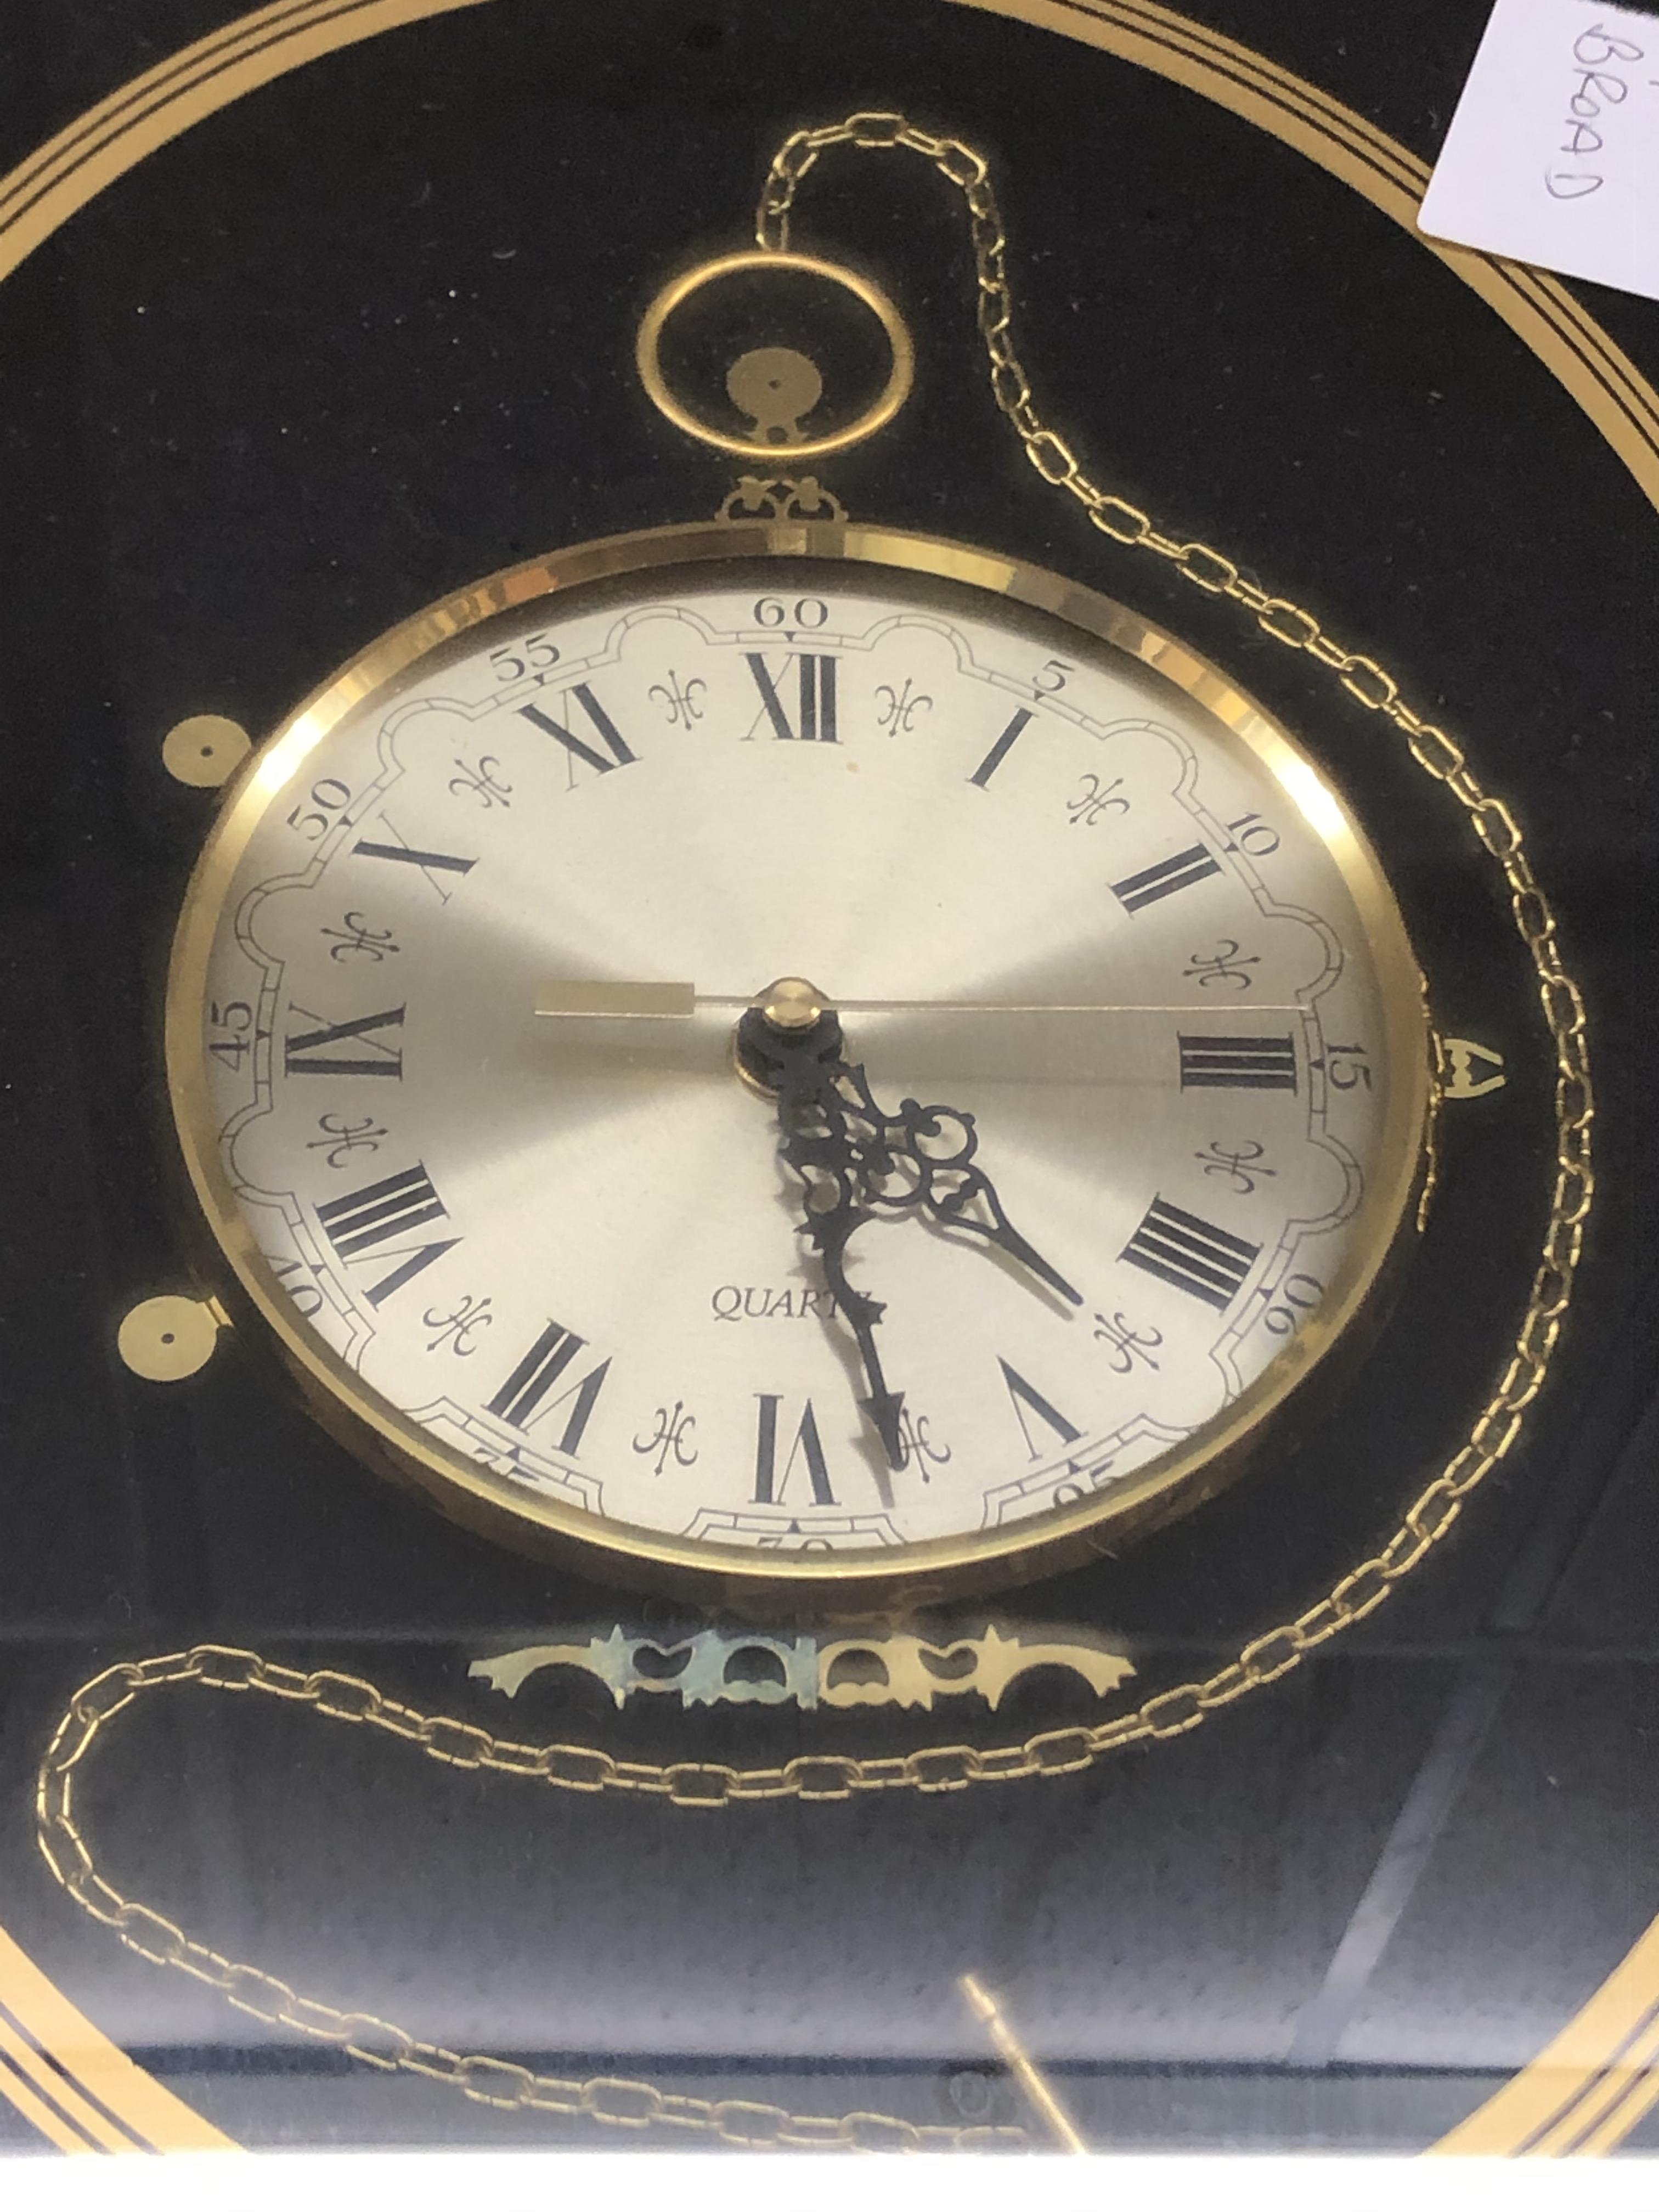 QUARTZ WALL CLOCK IN THE STYLE OF A POCKET WATCH - Image 2 of 2